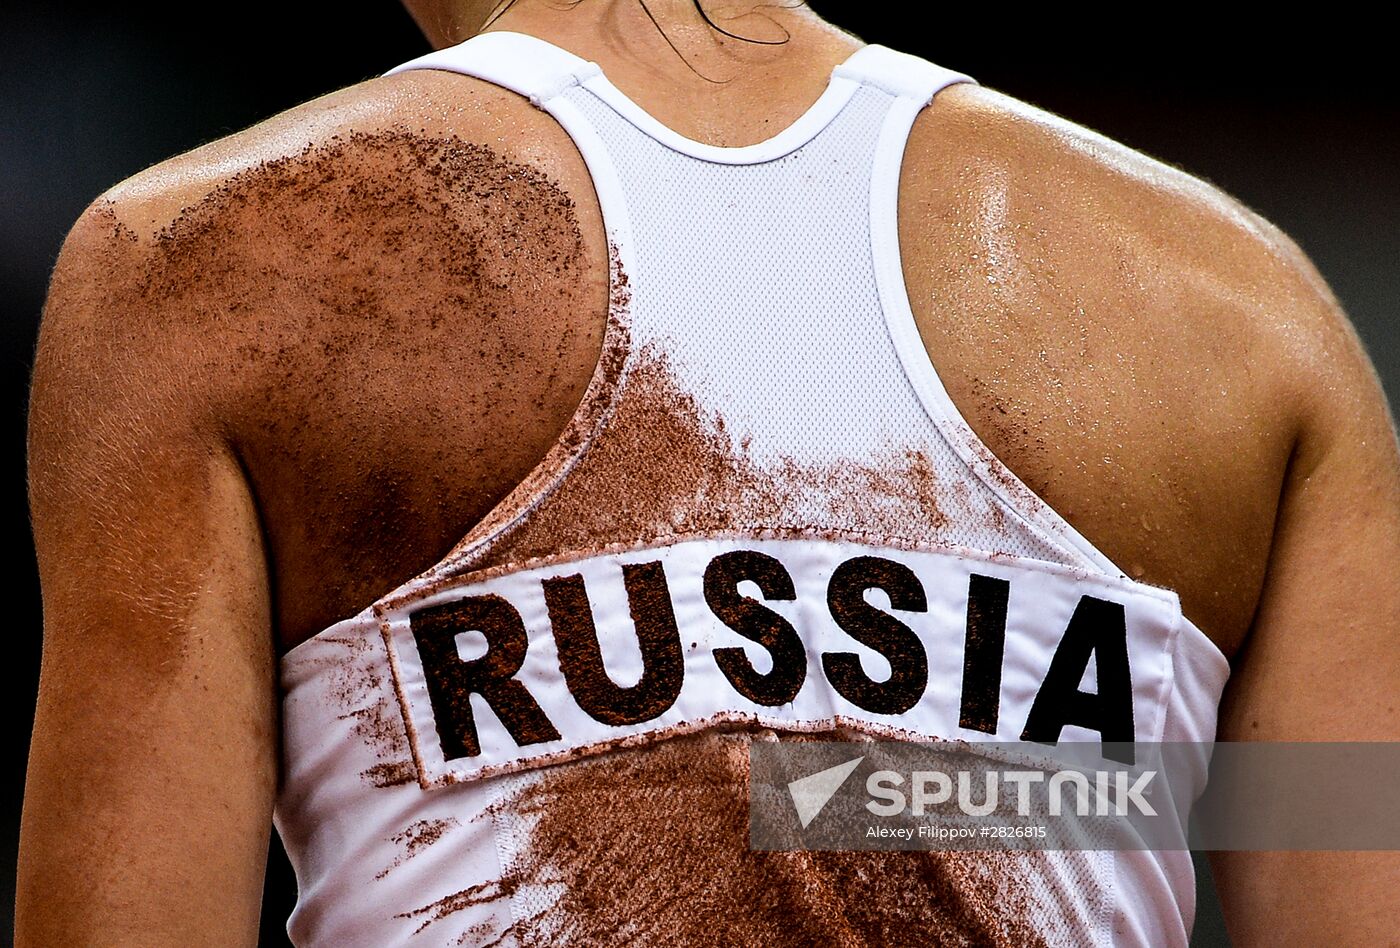 Tennis. Fed Cup. Russia vs. Belarus. Day Two